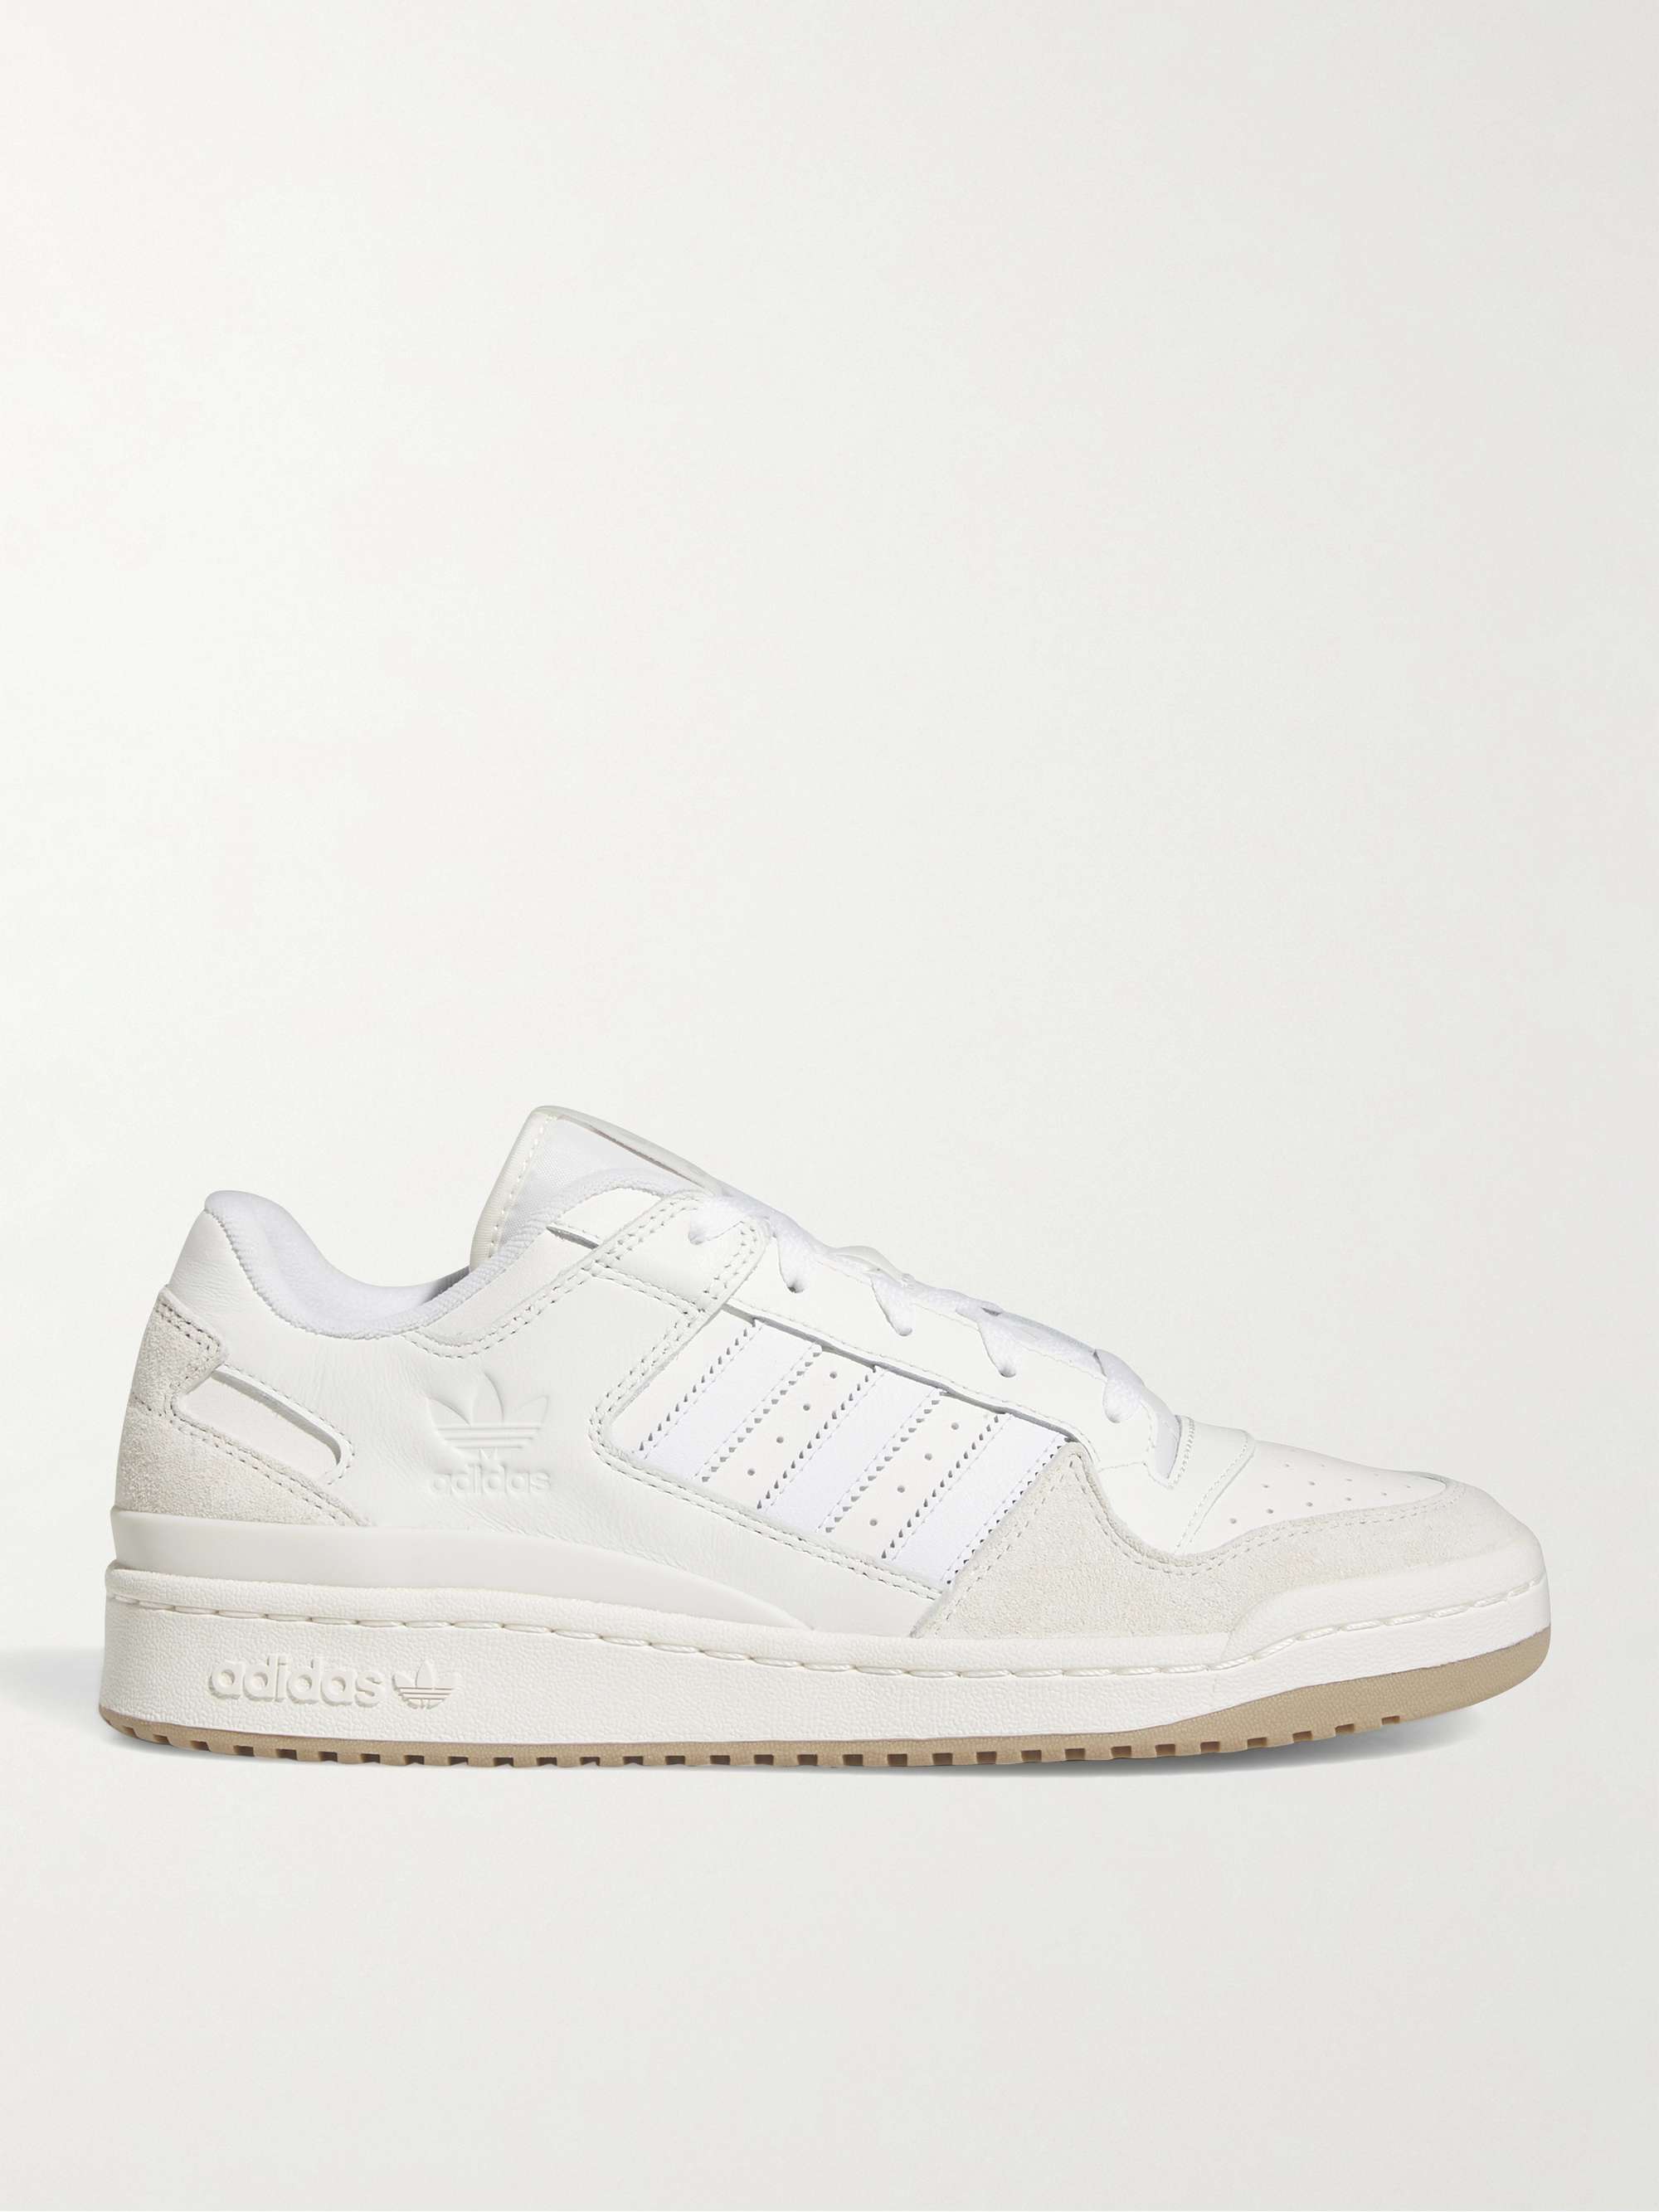 White Forum Low Suede-Trimmed Leather Sneakers | ADIDAS ORIGINALS | MR  PORTER